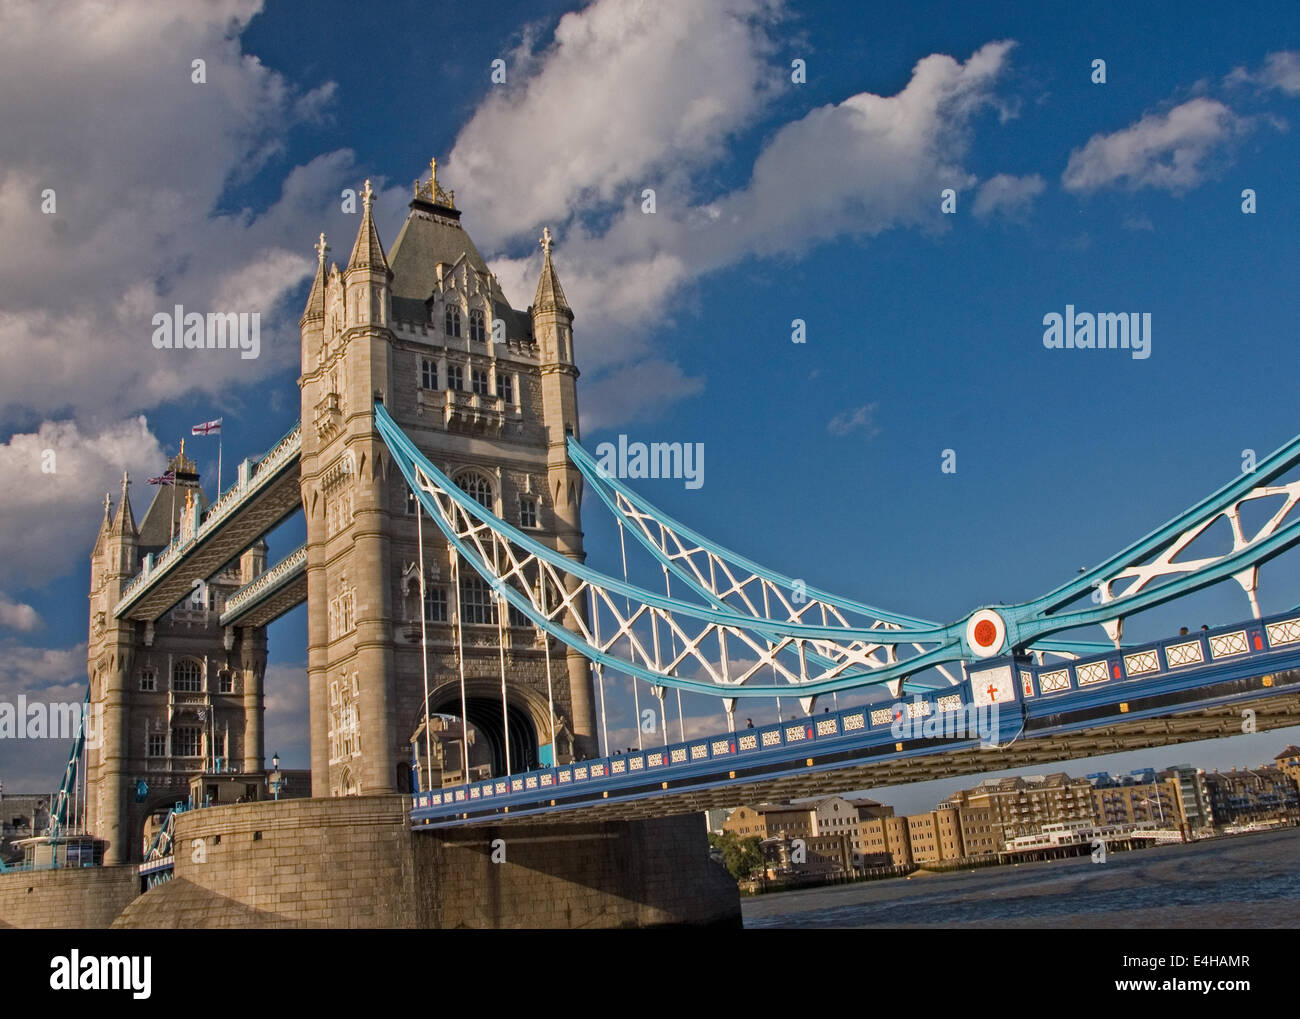 Tower Bridge across the River Thames in London is an iconic Bascule Bridge and marks the start of the Pool of London. Stock Photo